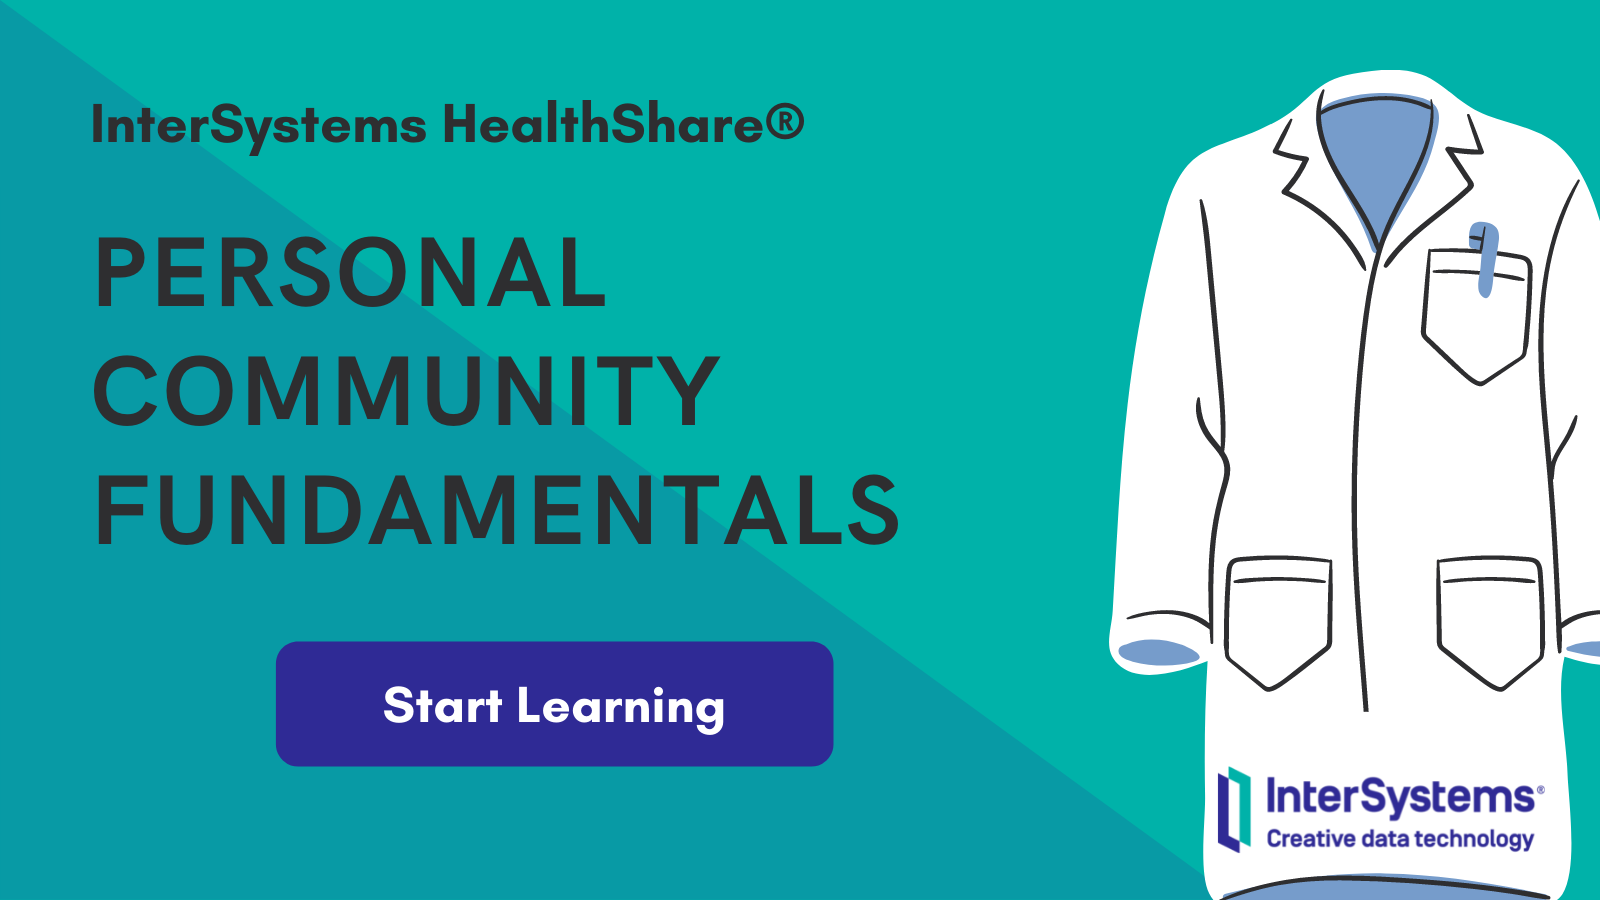 InterSystems HealthShare® Personal Community Fundamentals: Start Learning!